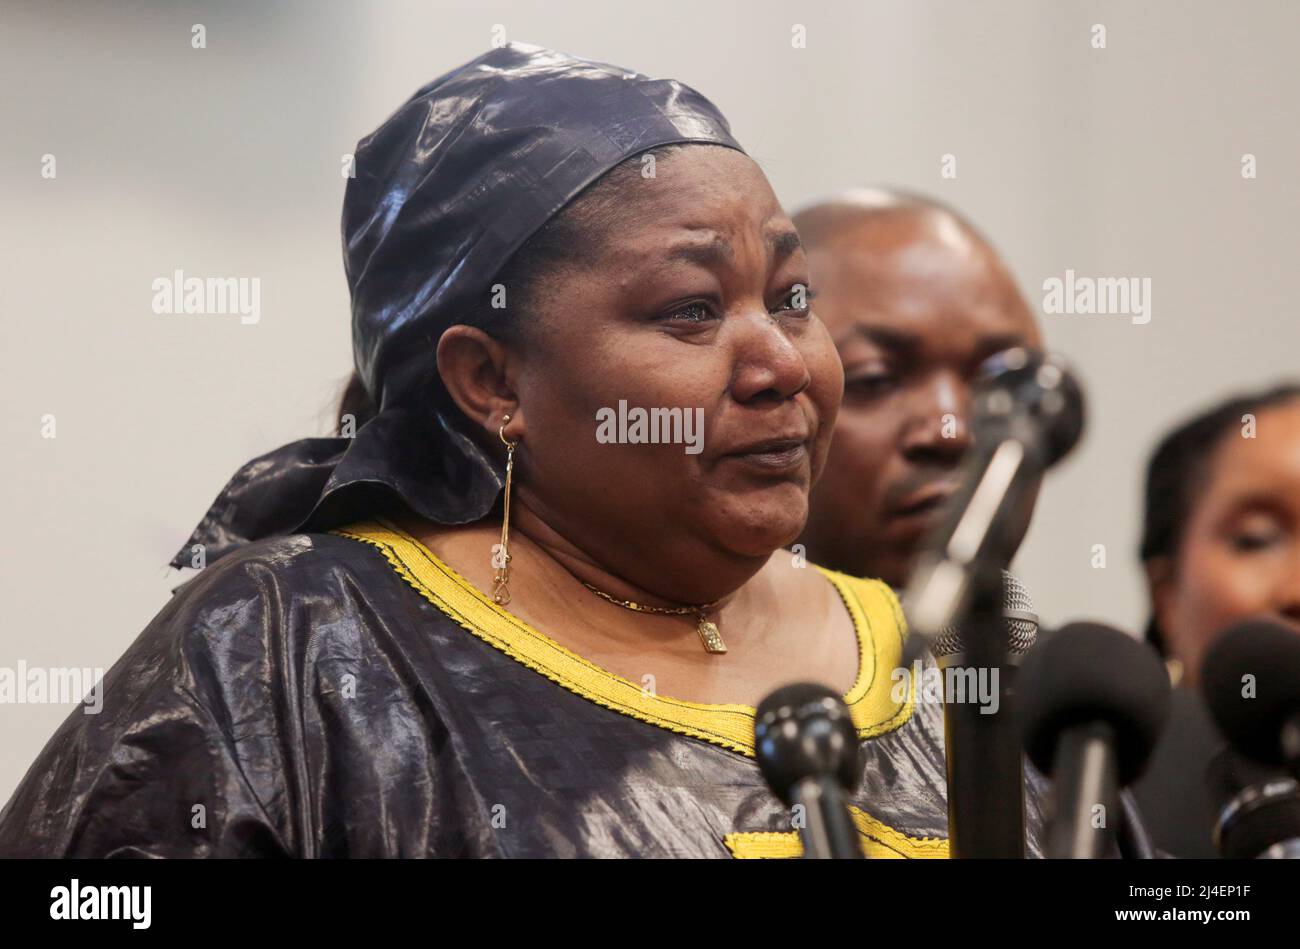 Dorcas Lyoya, mother of Patrick Lyoya, an unarmed Black man who was shot and killed by a Grand Rapids Police officer during a traffic stop on April 4, attends a news conference the day after video footage of the shooting was released, in Grand Rapids, Michigan, U.S., April 14, 2022.  REUTERS/Rebecca Cook Stock Photo